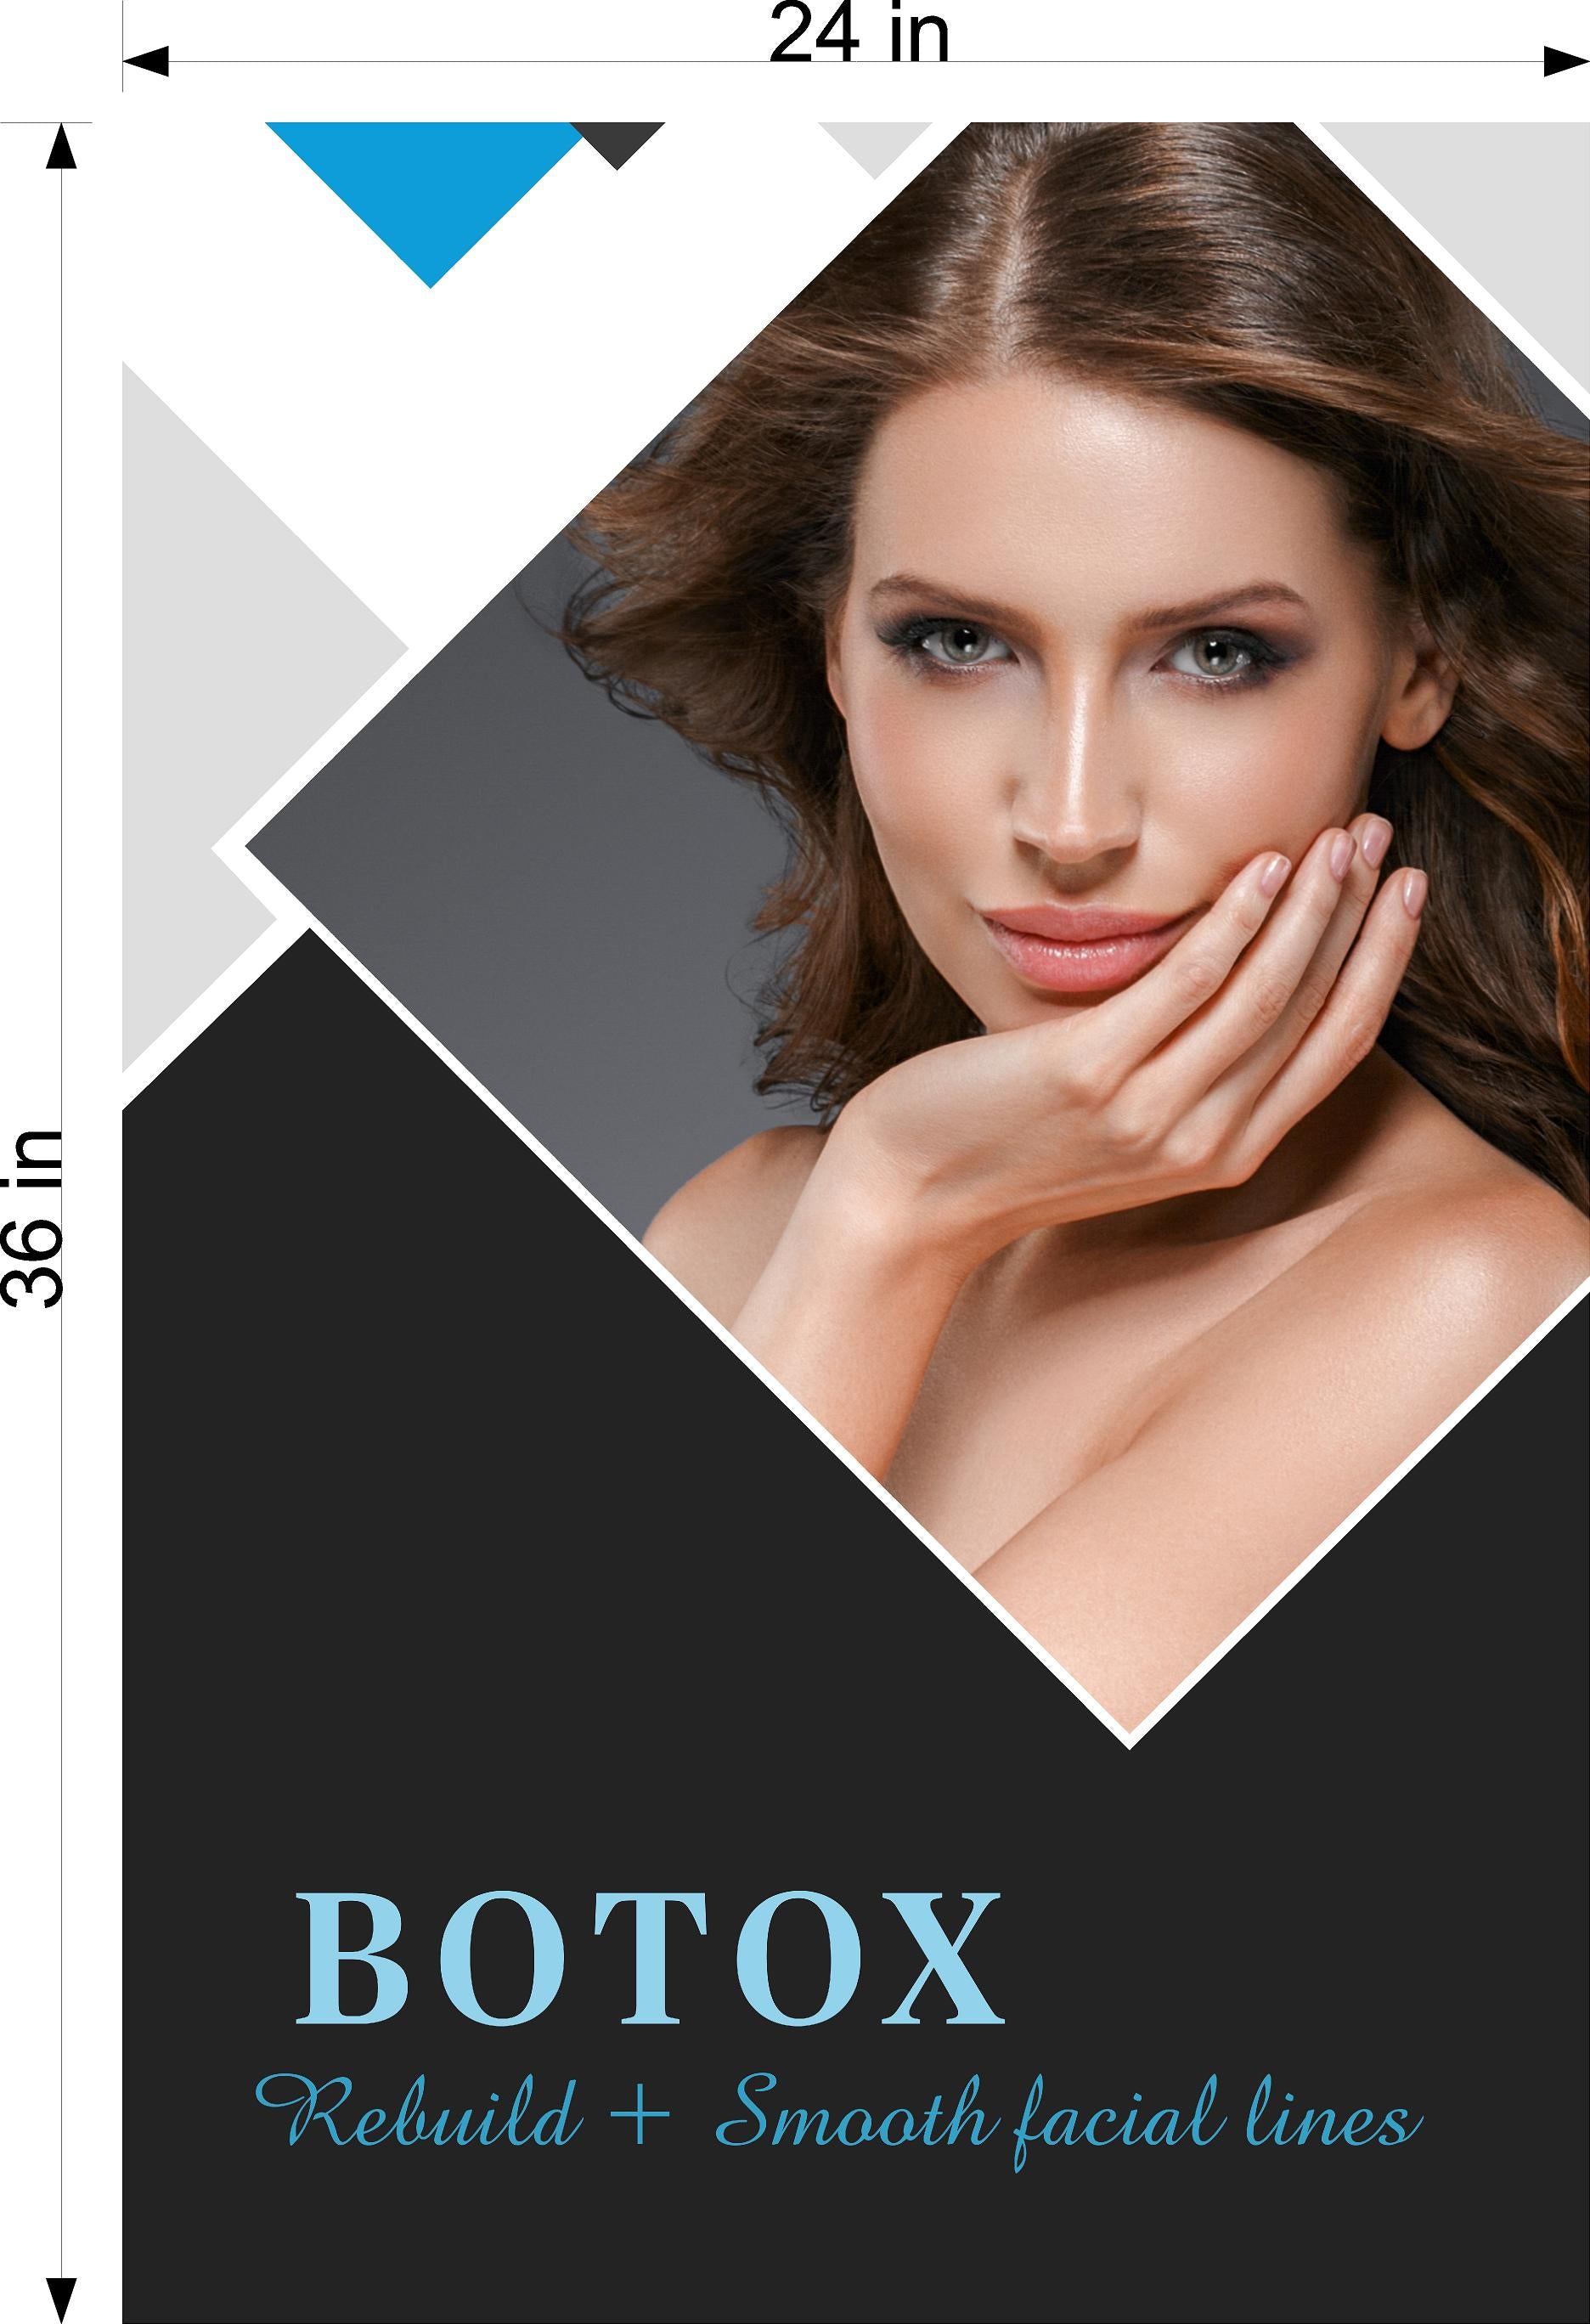 Botox 12 Photo-Realistic Paper Poster Premium Interior Inside Sign Advertising Marketing Wall Window Non-Laminated Vertical